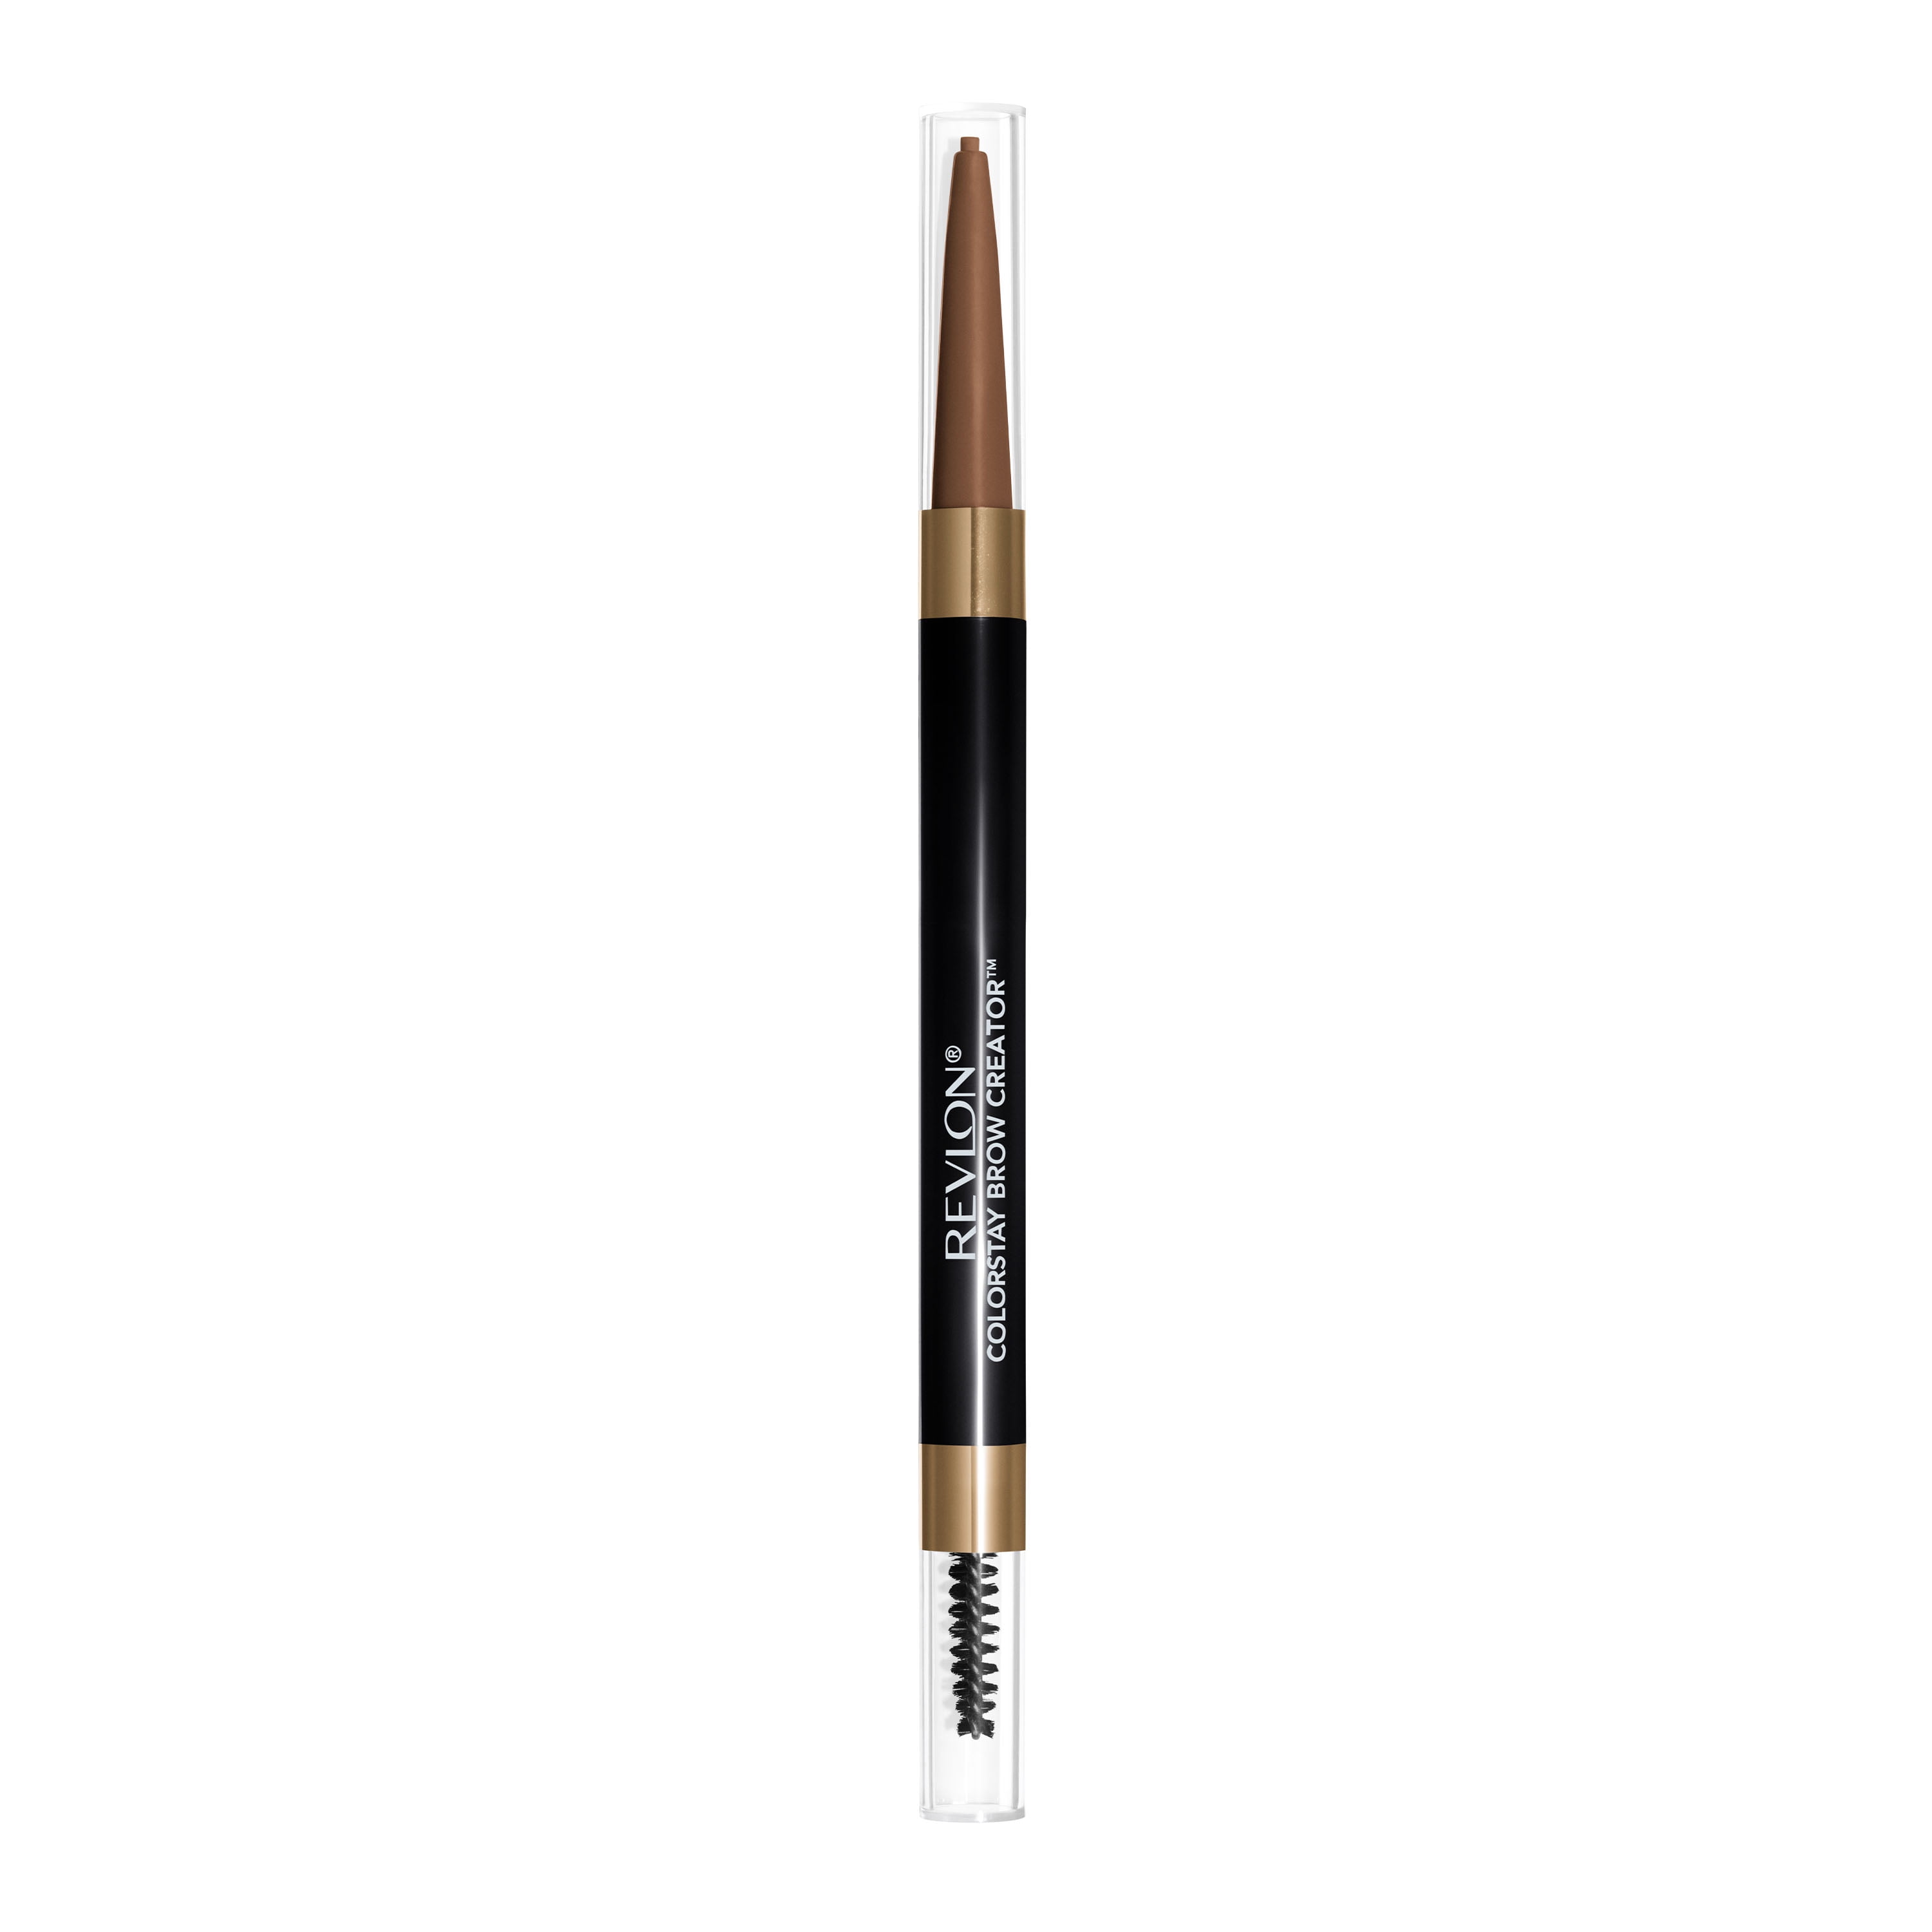 Revlon Colorstay Eyebrow Pencil Creator with Powder & Spoolie Brush to Fill, Define, Sculpt, Shape & Diffuse Perfect Brows, 605 Soft Brown, 0.01 oz